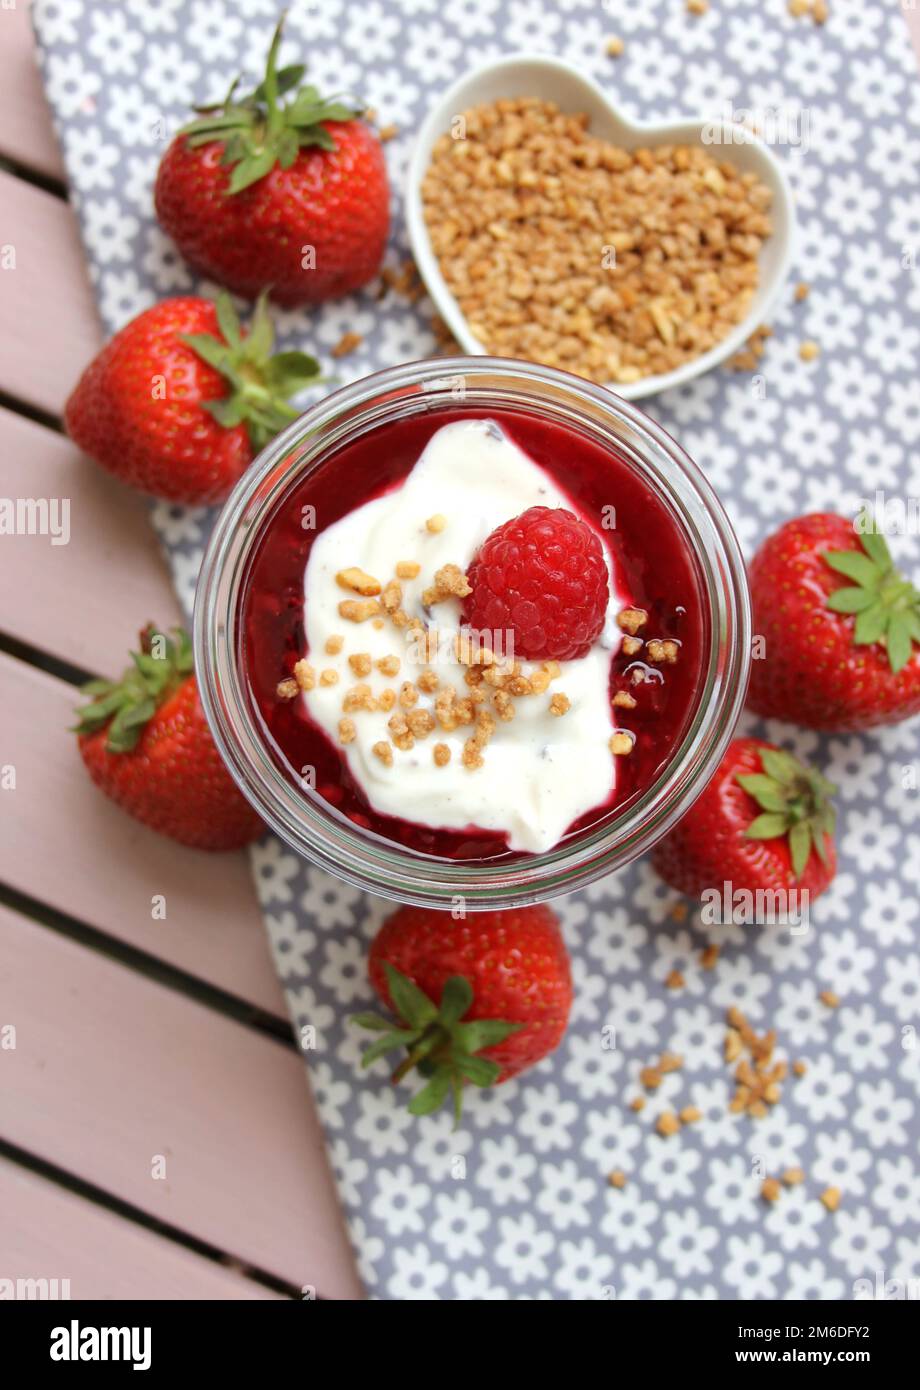 Red fruit jelly with strawberries and raspberries Stock Photo